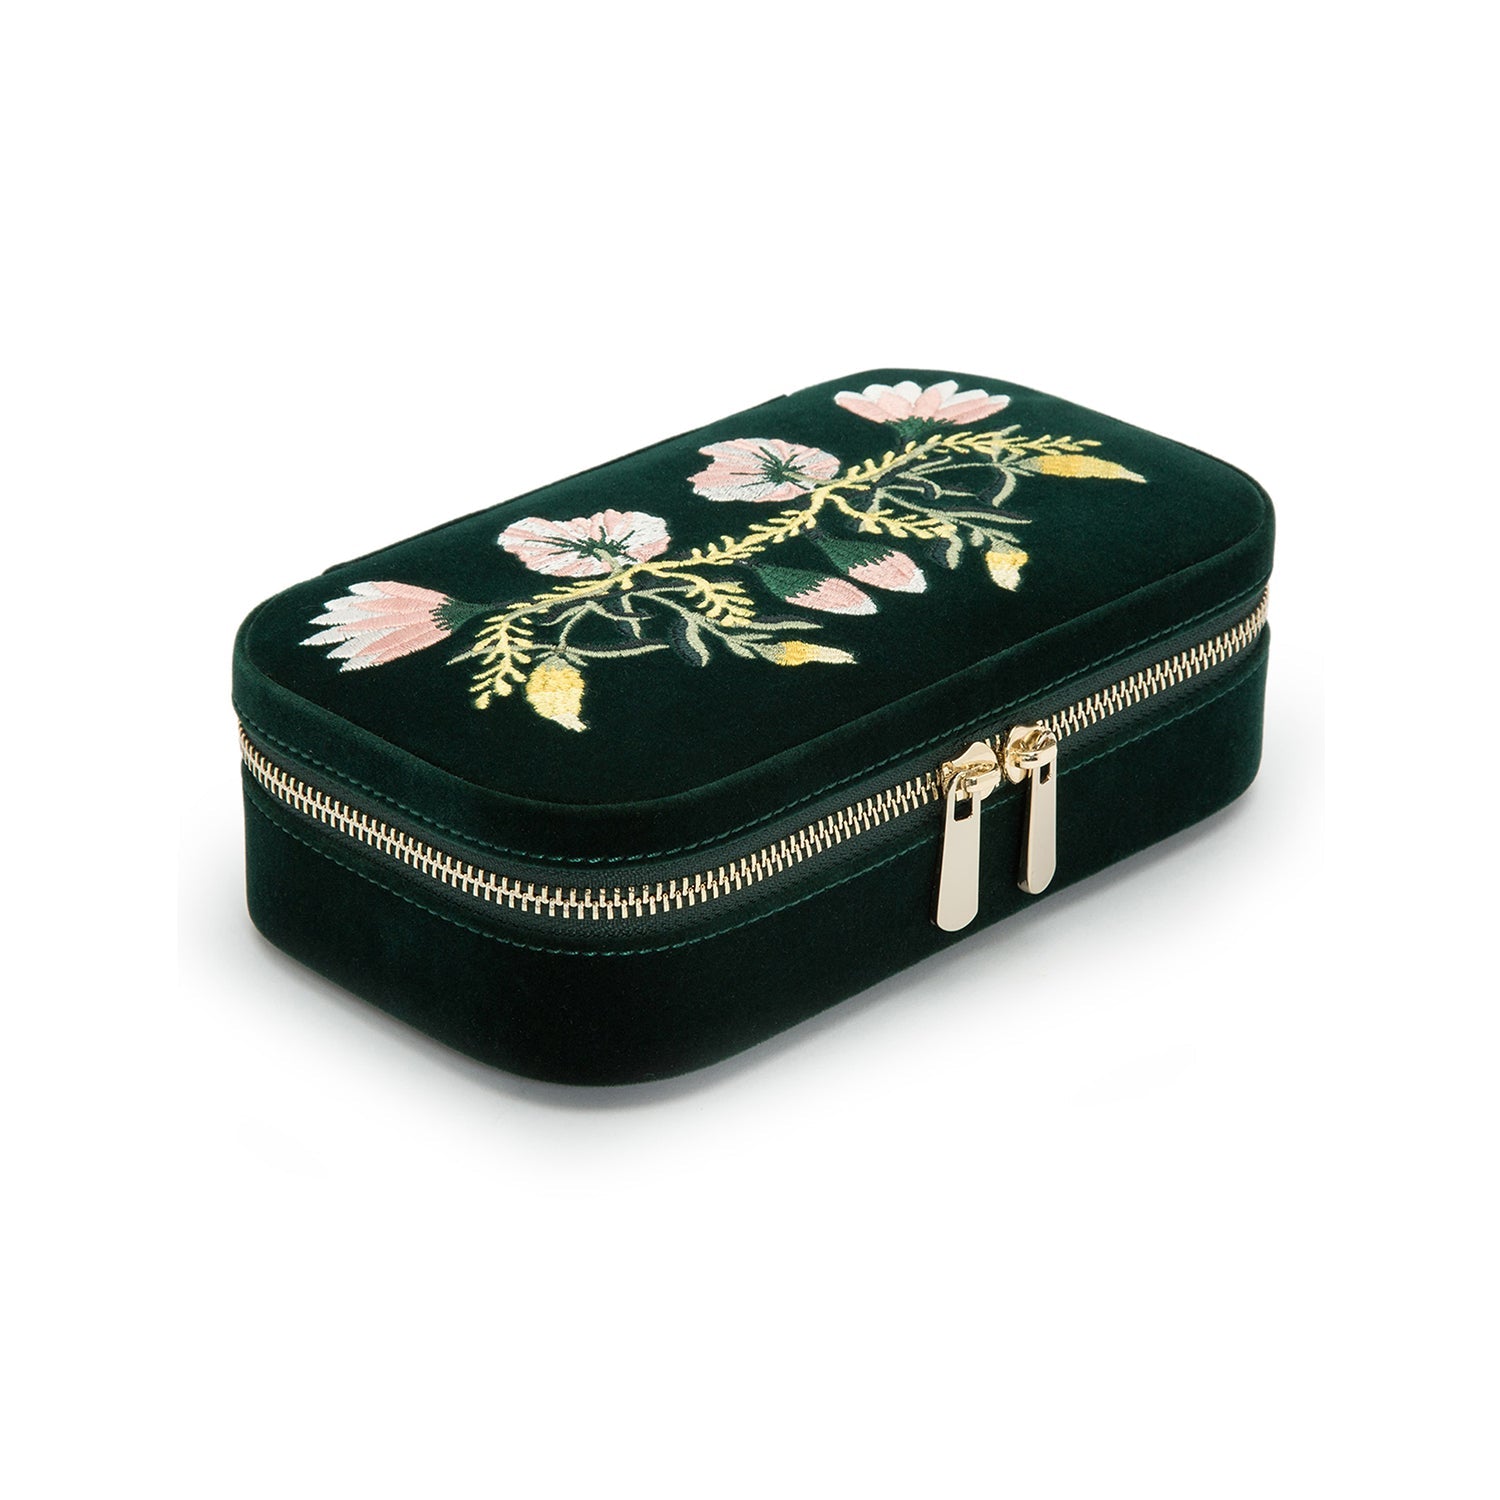 ZOE TRAVEL ZIP CASE, Forest green velvet Mirror, 3 ring rolls, medium compartment with cover, and 2 small compartments LusterLoc™: Allows the fabric lining the inside of your jewelry cases to absorb the hostile gases known to cause tarnishing. Under typic